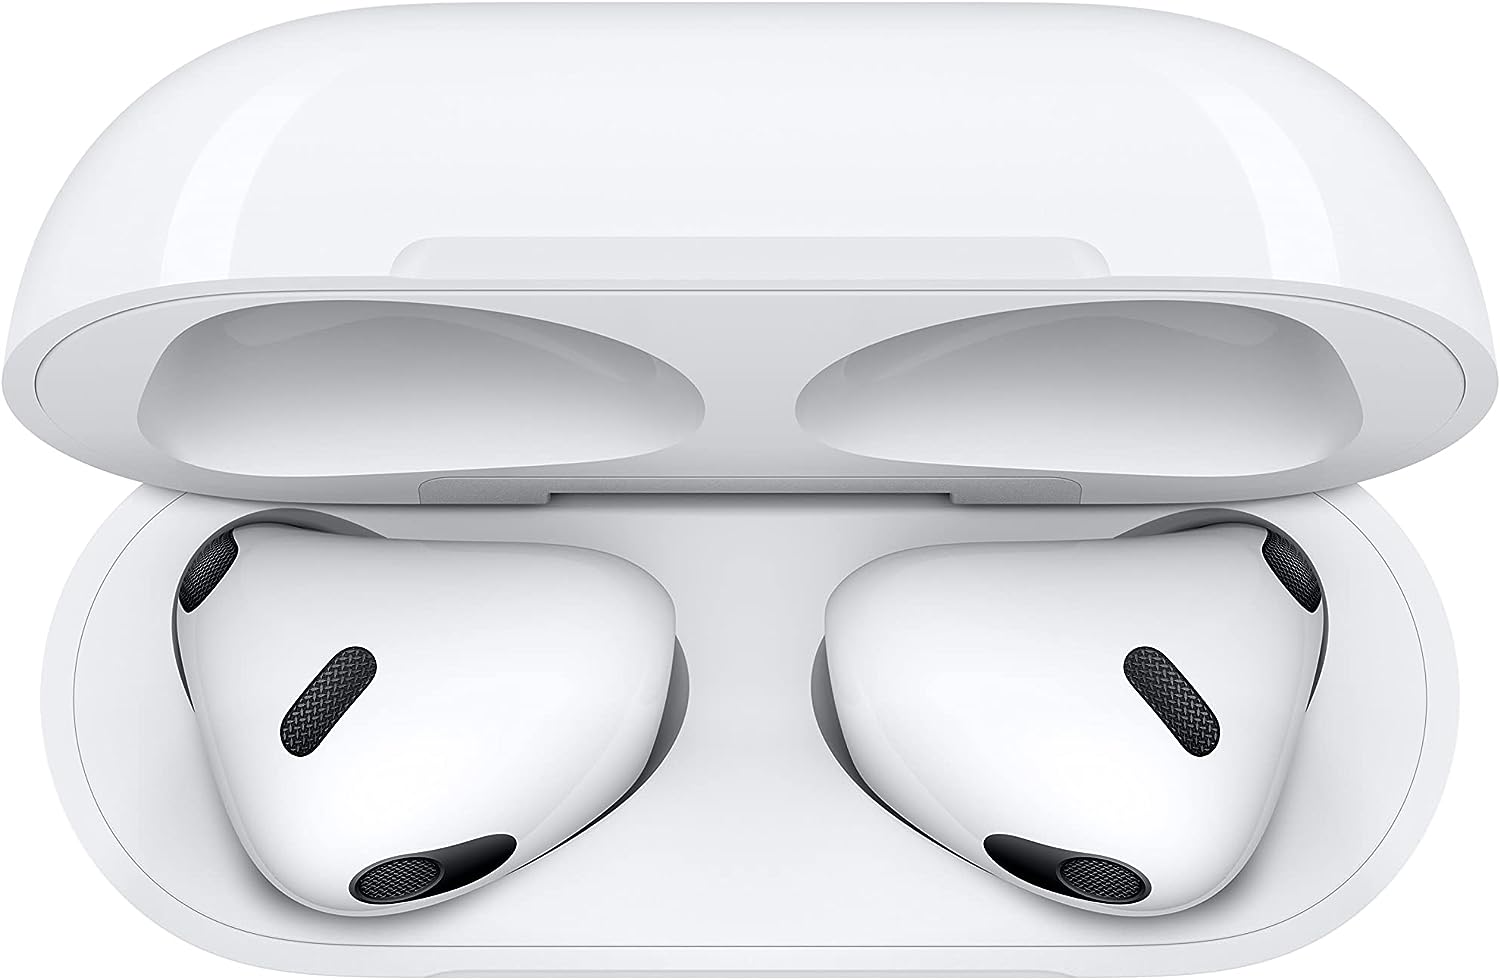 Used Apple AirPods (3rd generation) with MagSafe Charging Case